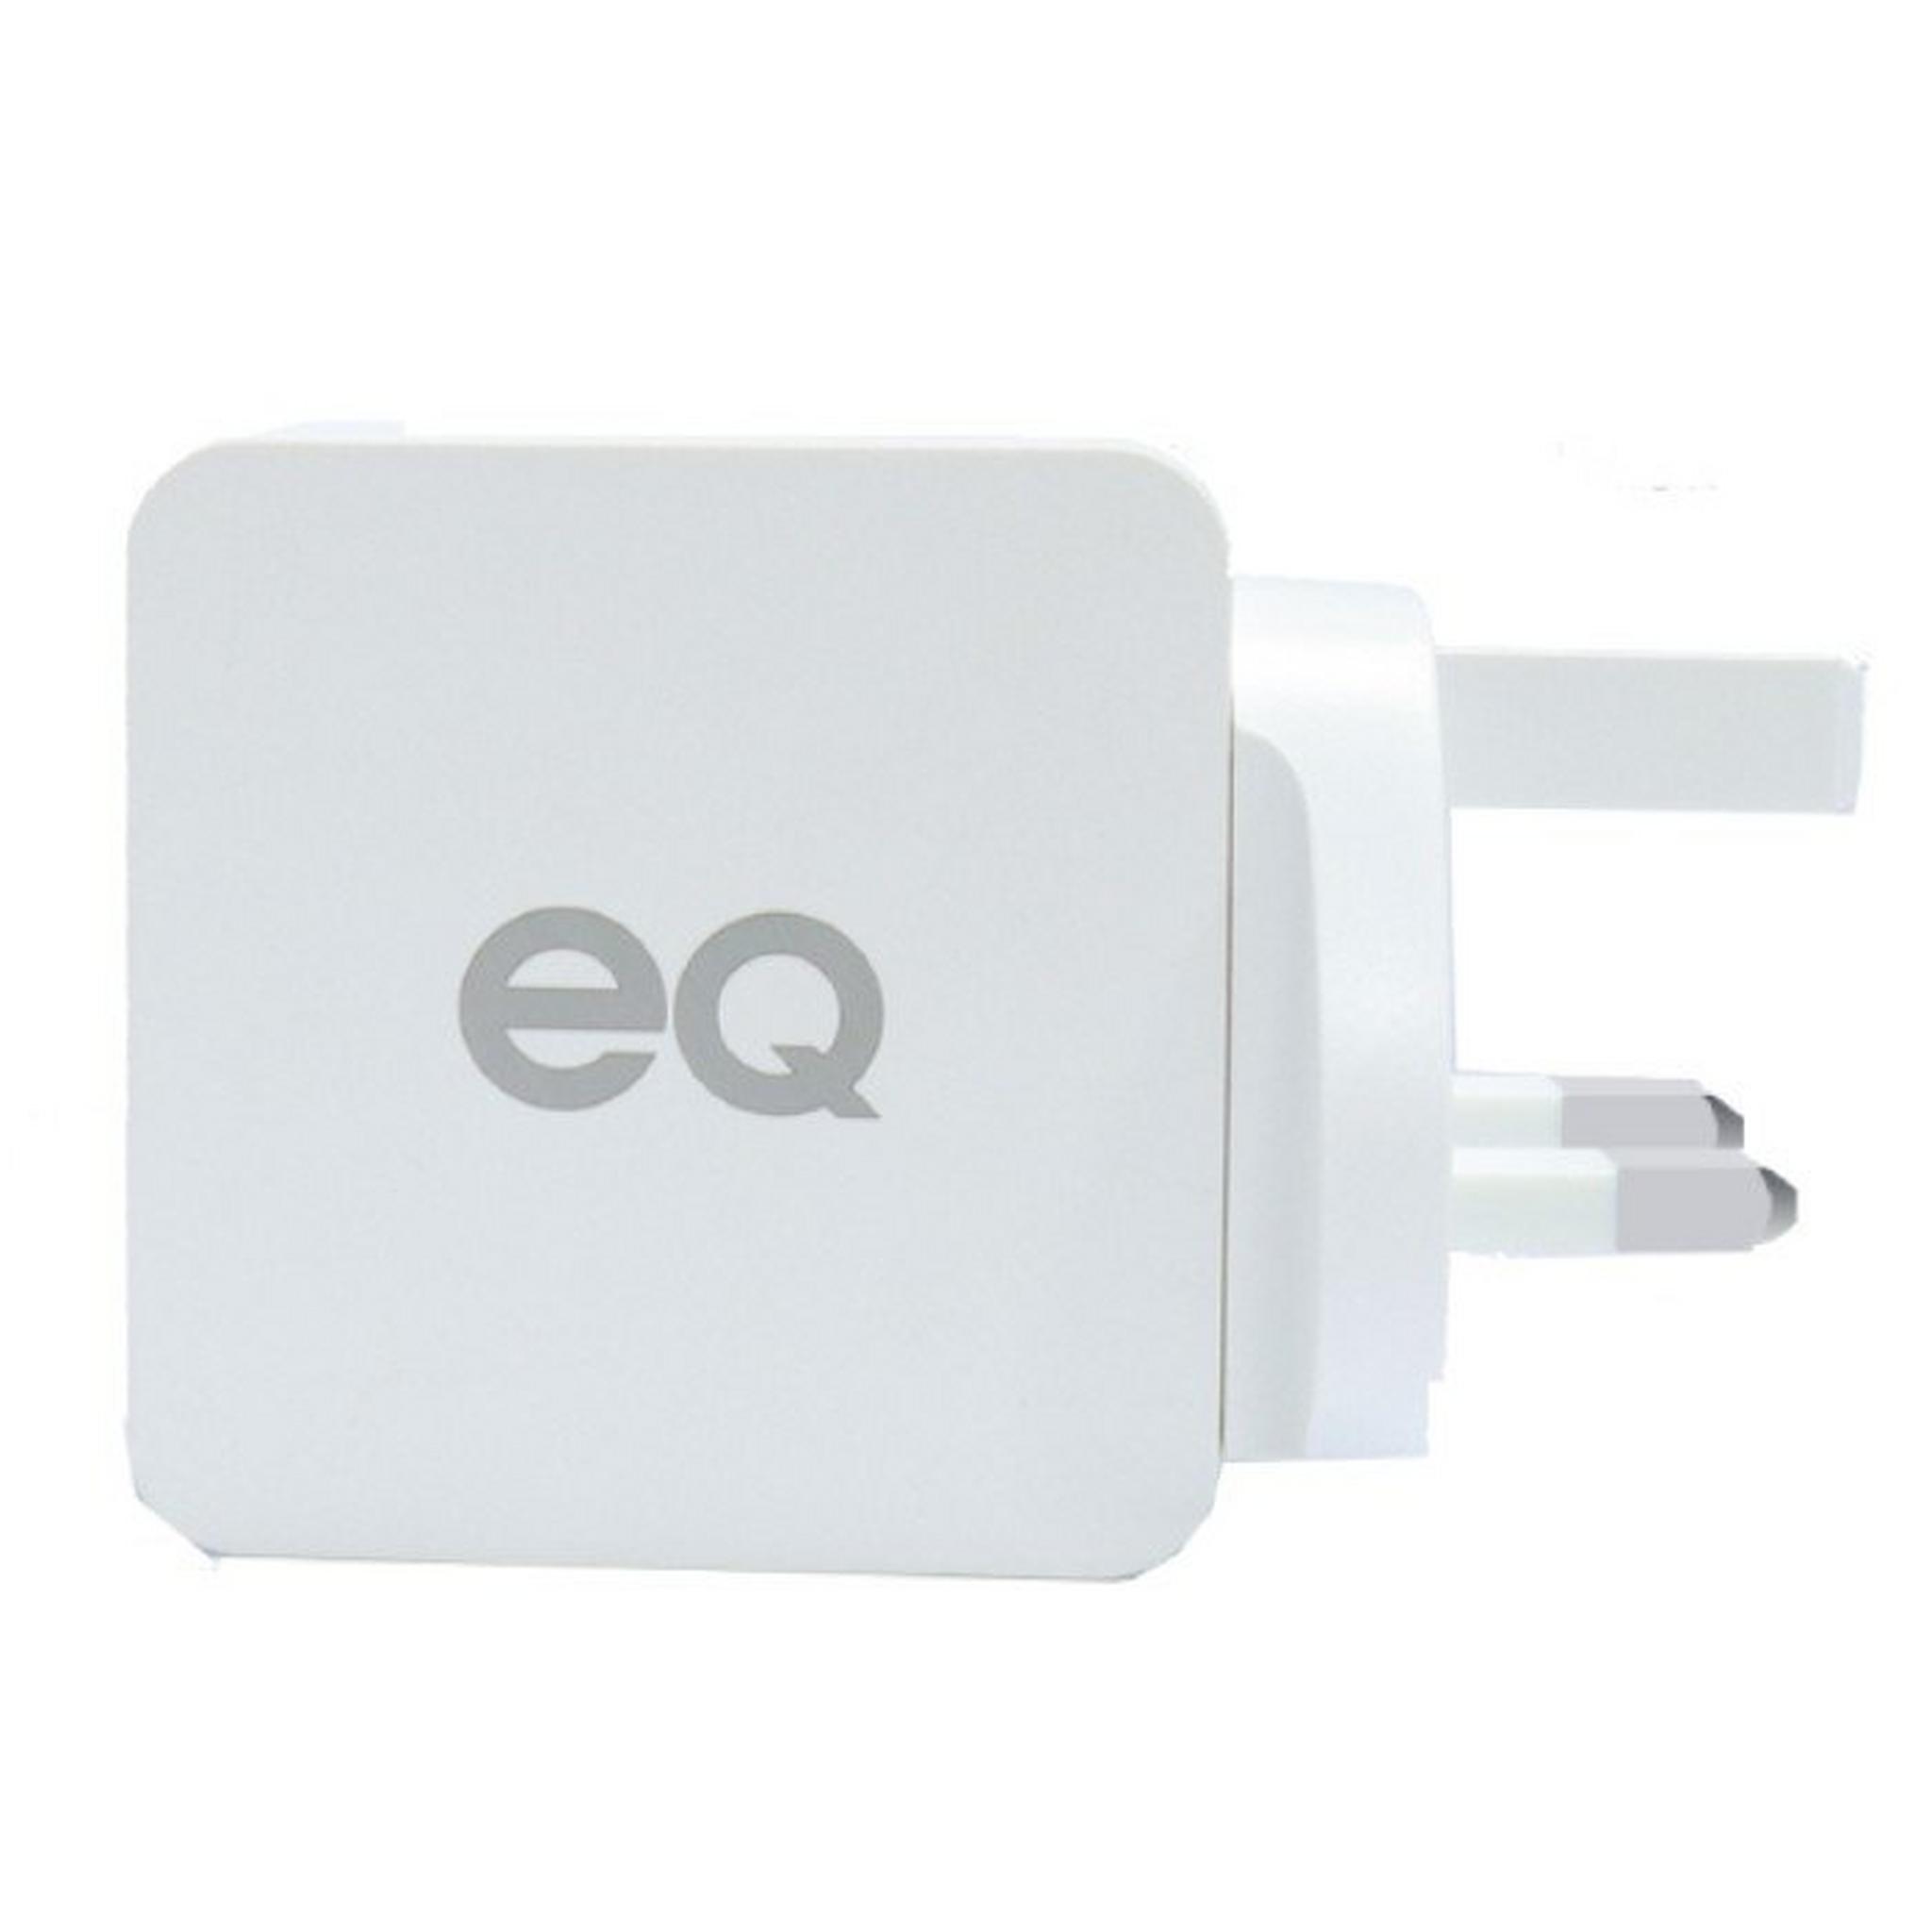 EQ 5000mAh Power Bank (EQ-PW276A) - Black + EQ PD 20W USB-C Wall Charger - White